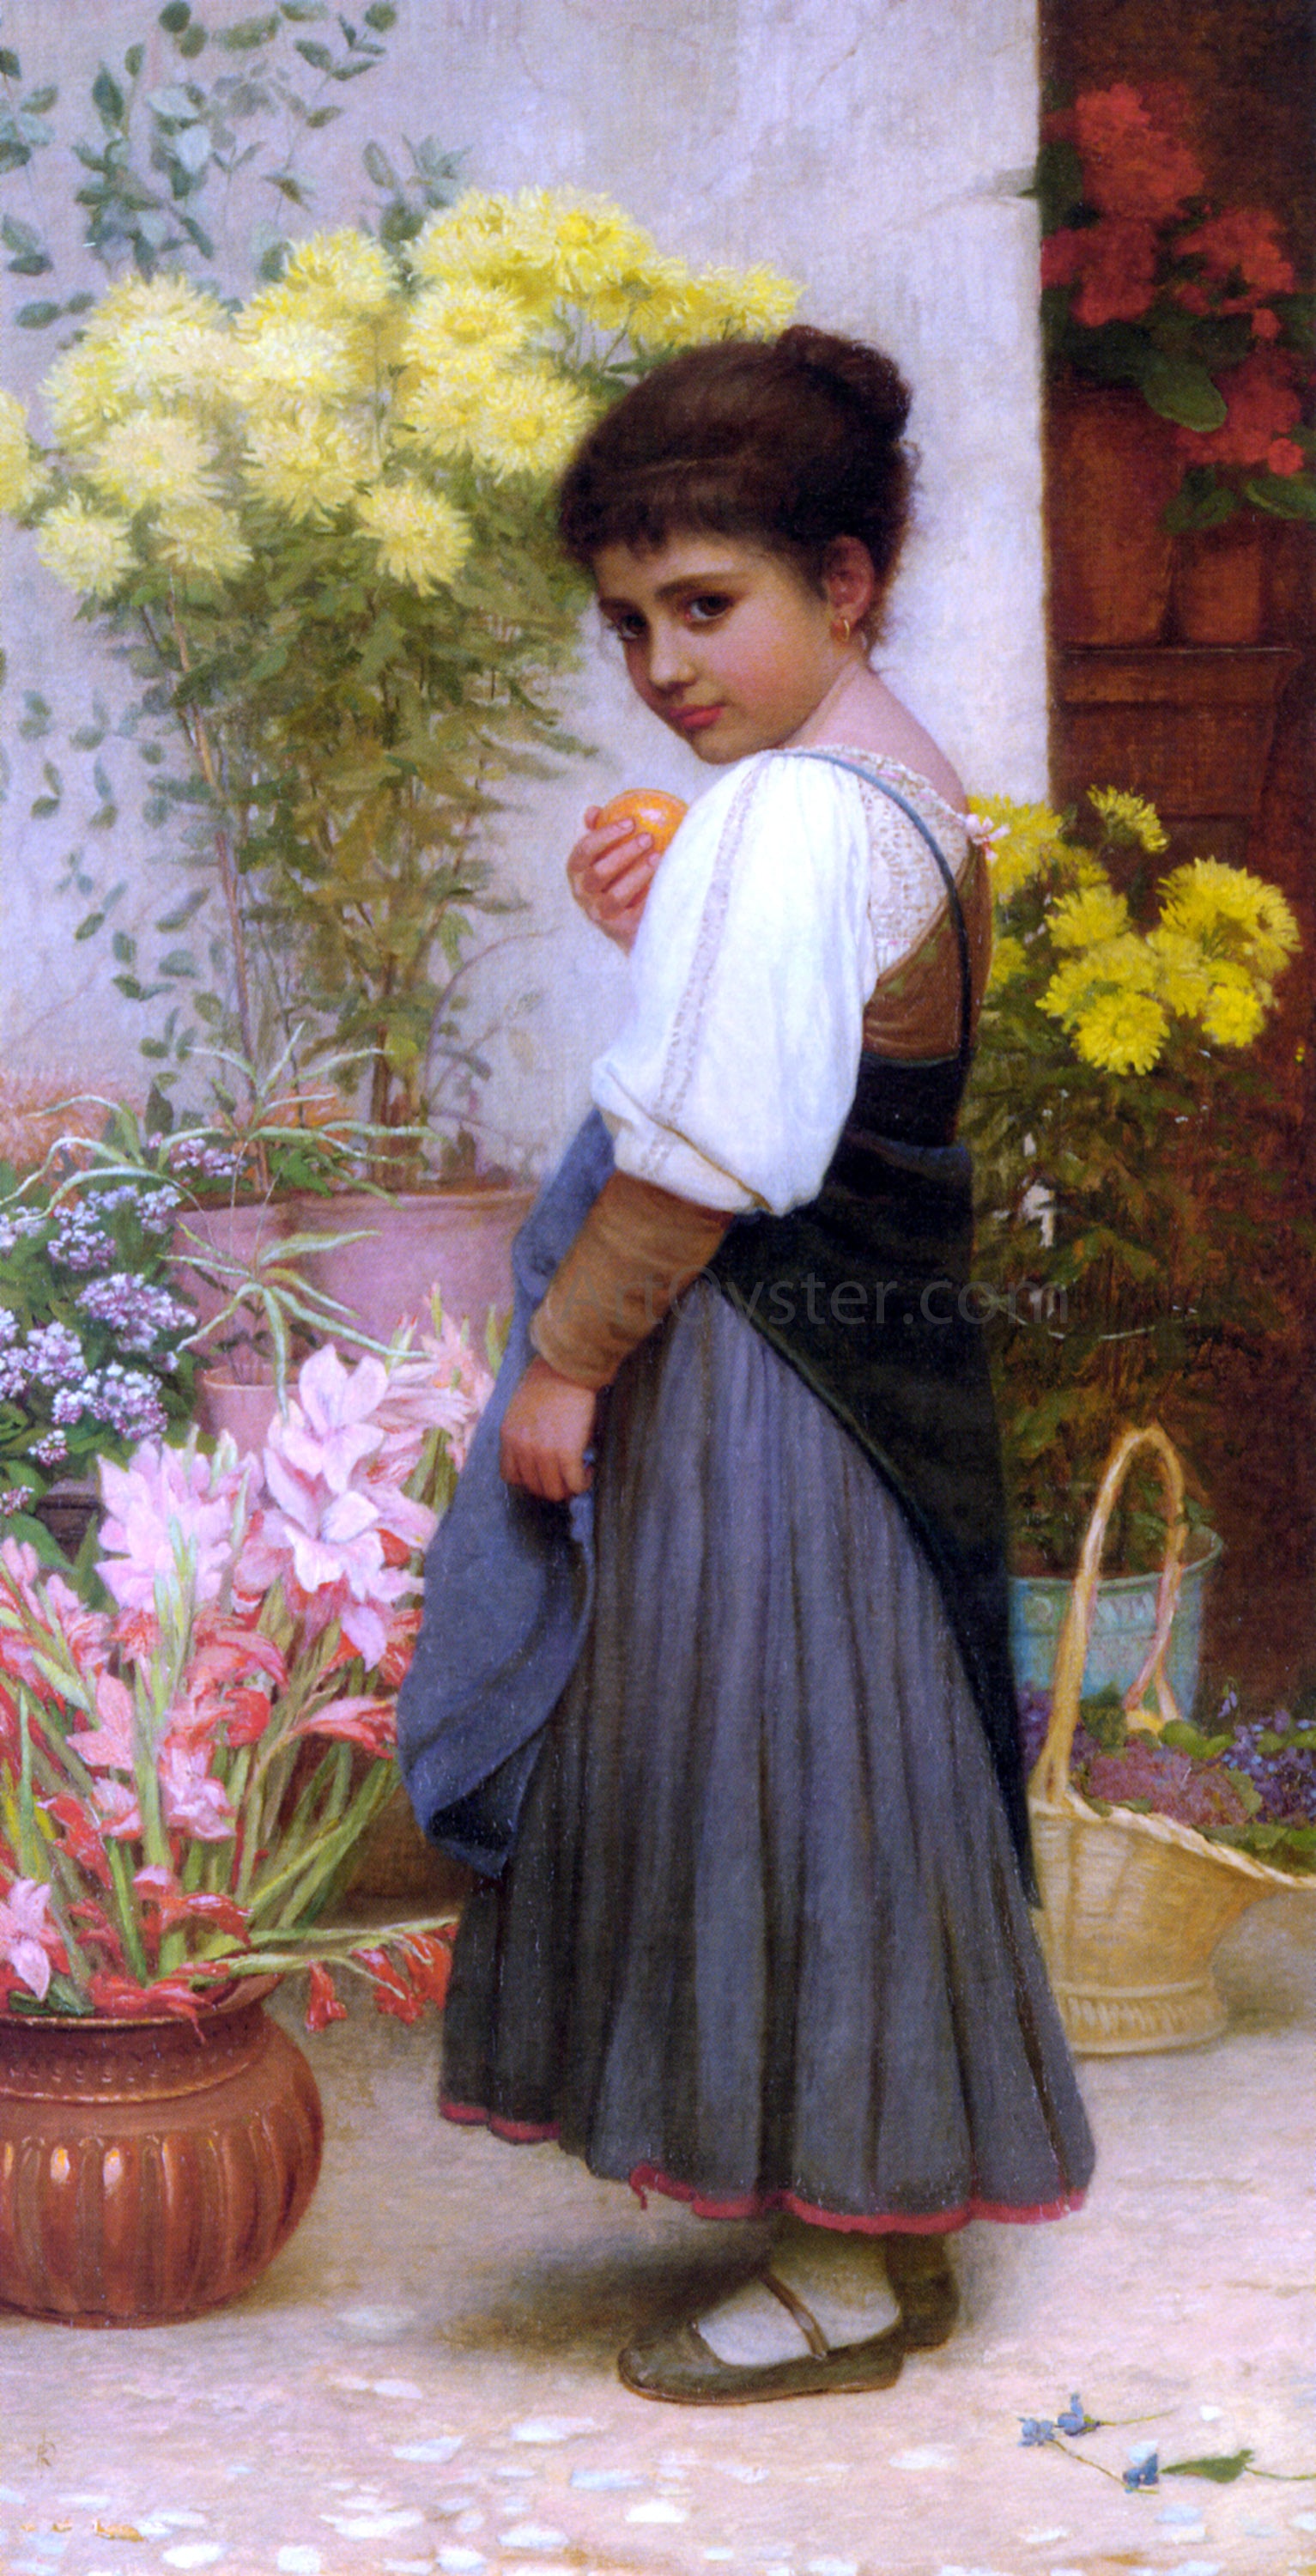  Kate Perugini The Flower Merchant - Hand Painted Oil Painting